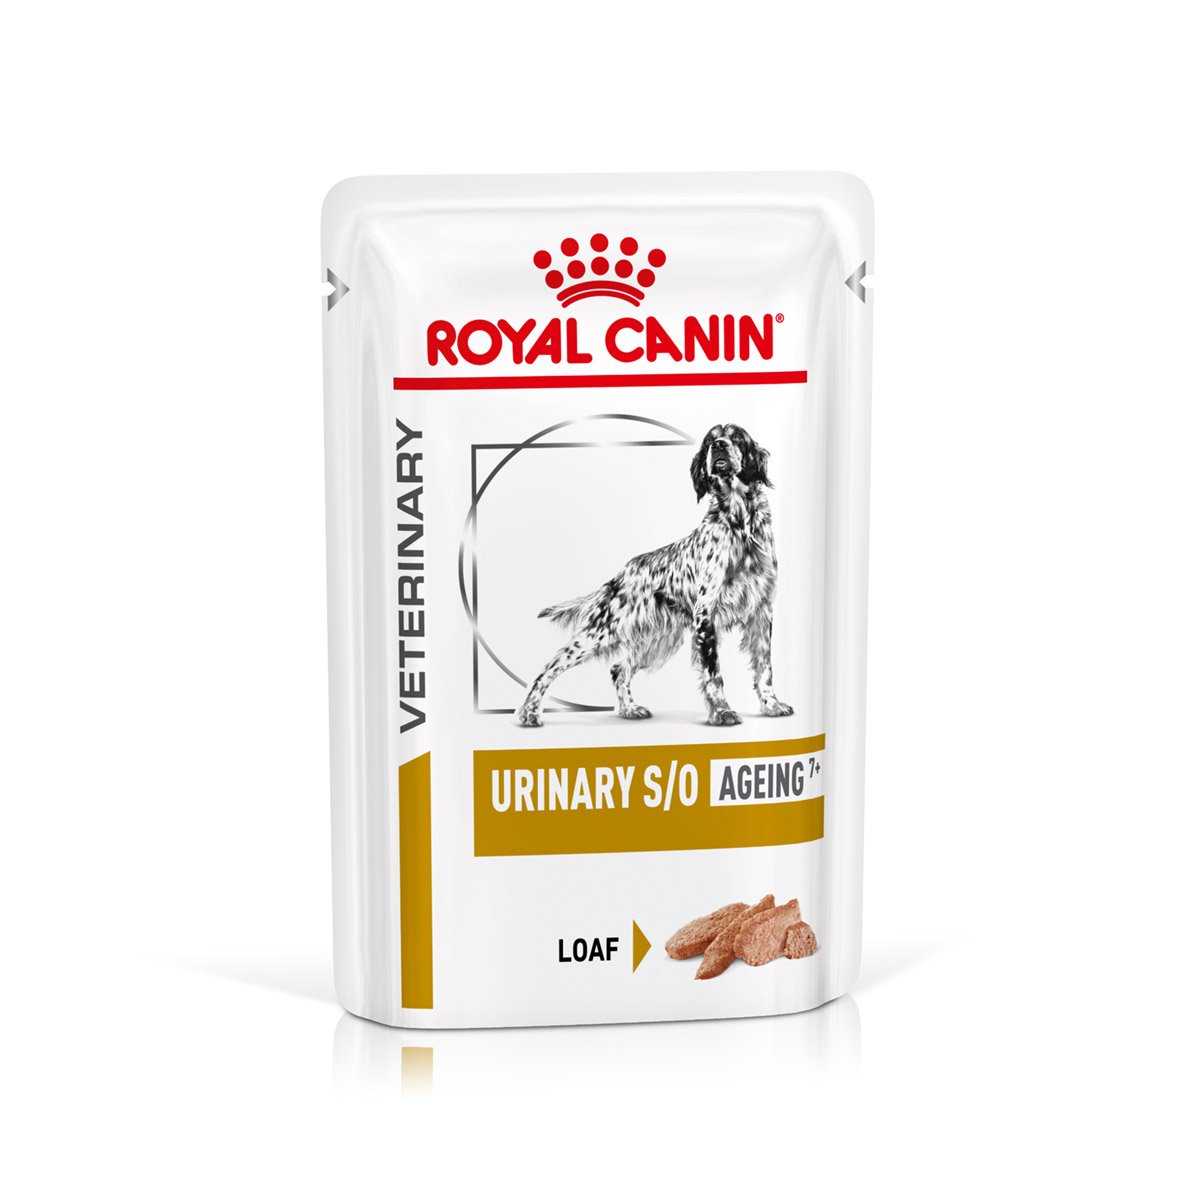 ROYAL CANIN® Veterinary URINARY S/O Ageing 7+ Nassfutter für Hunde 48x85g von Royal Canin